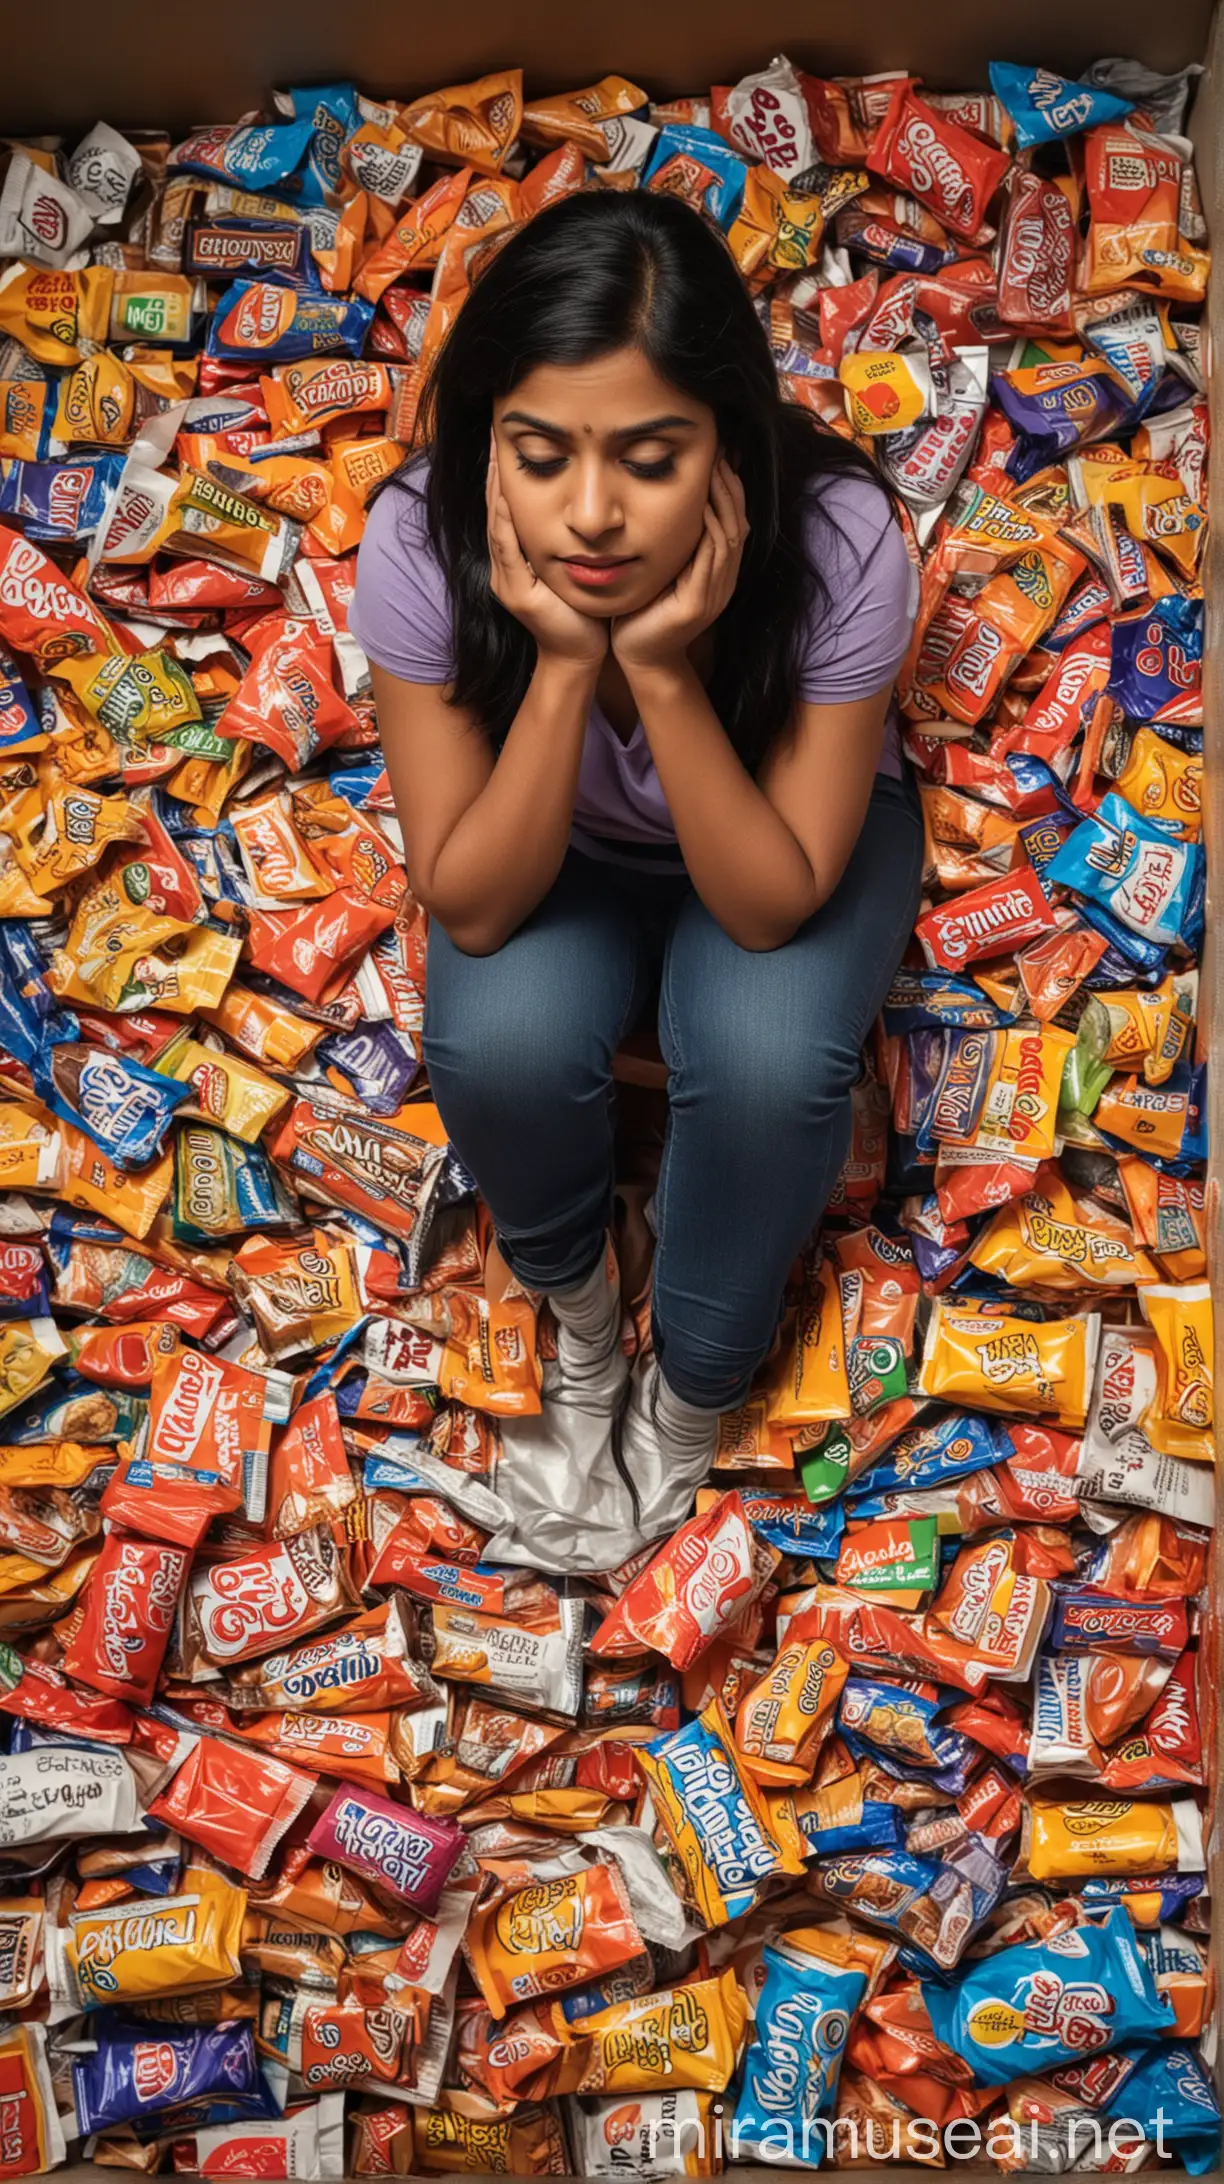 Show Priya reflecting on her unhealthy habits while surrounded by junk food wrappers.